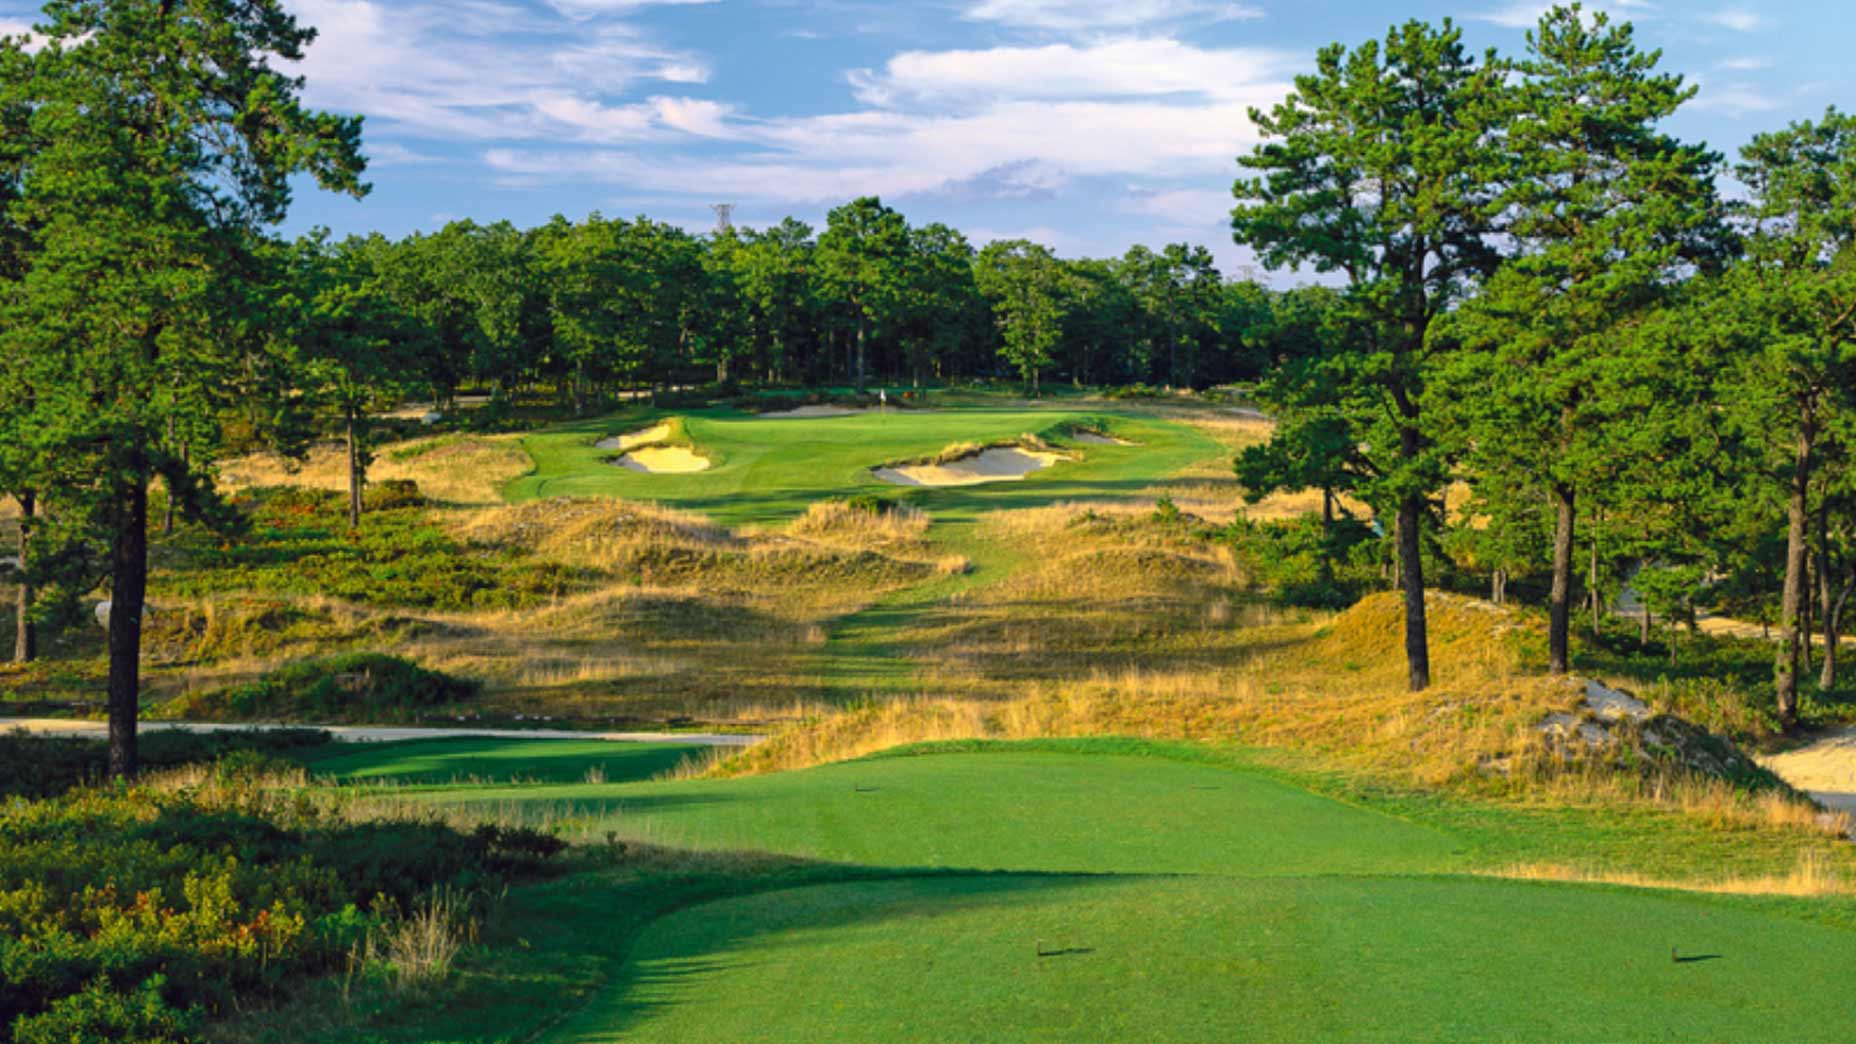 Best golf courses in Massachusetts, according to GOLF Magazine’s expert course raters